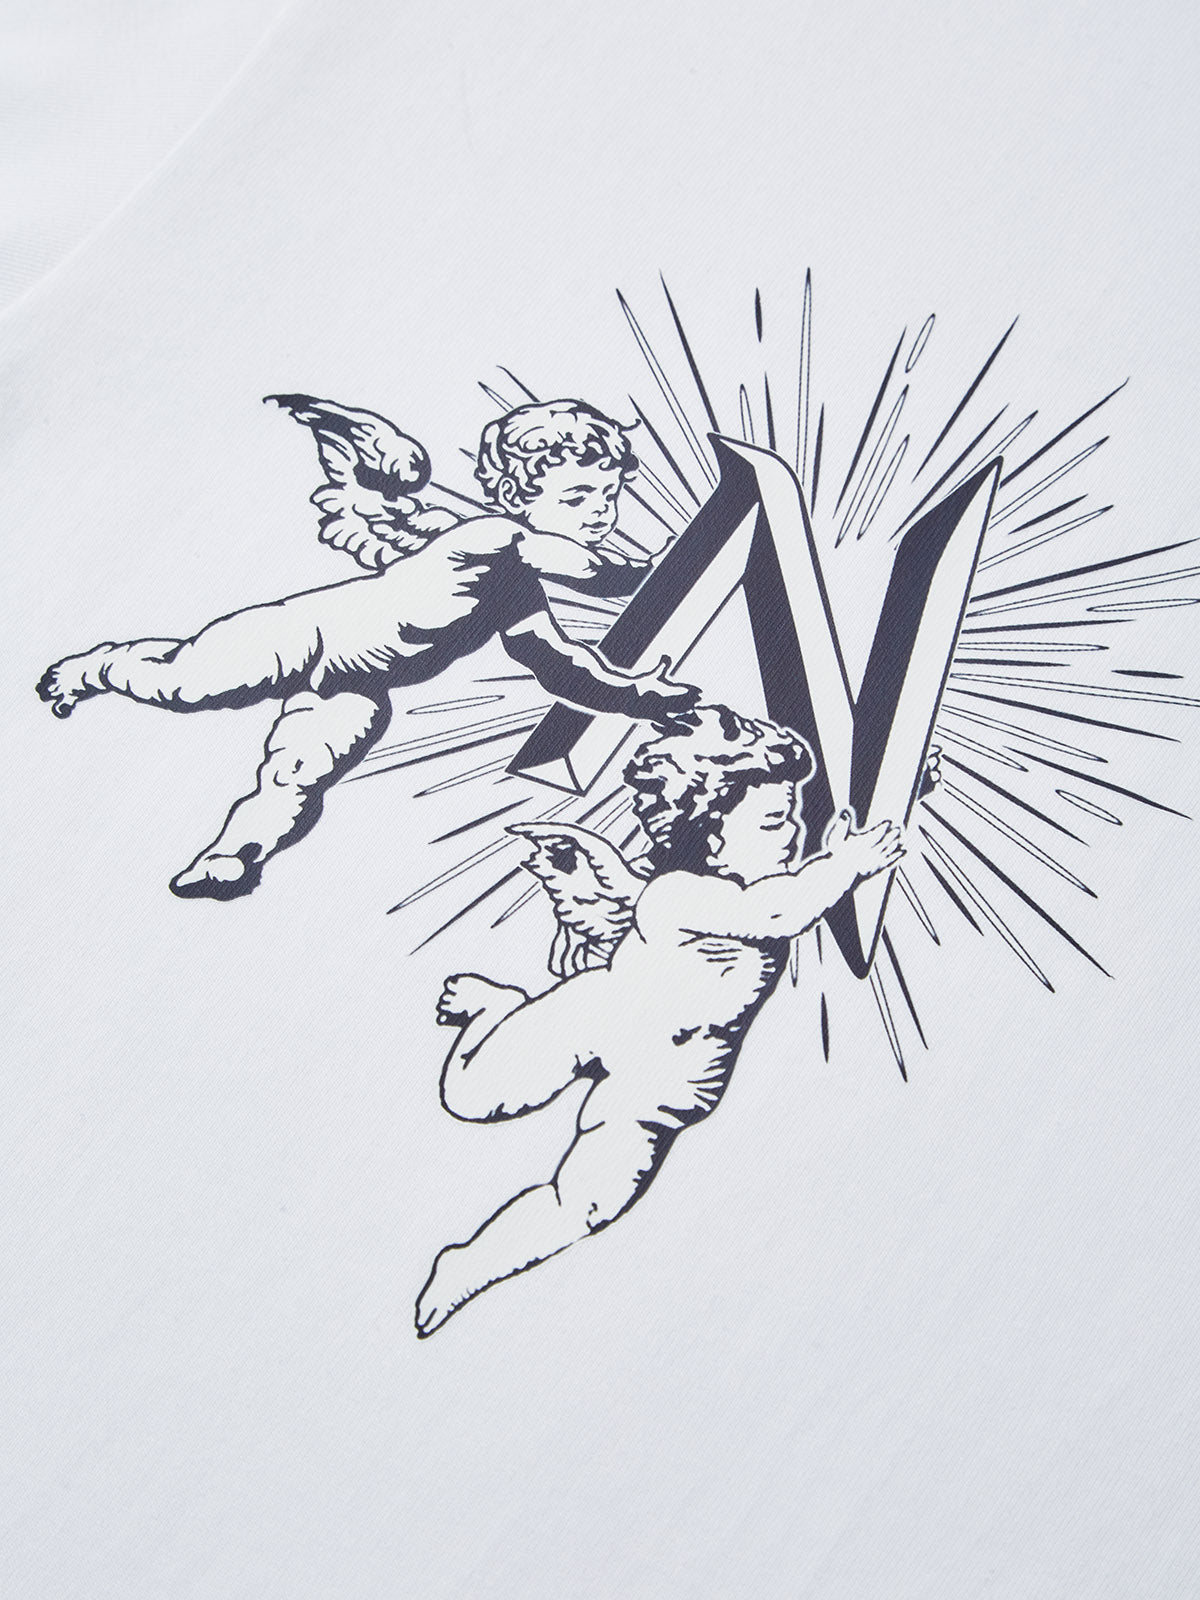 OBSTACLES & DANGERS© Classic Logo and Madonna and Child Casual Tee